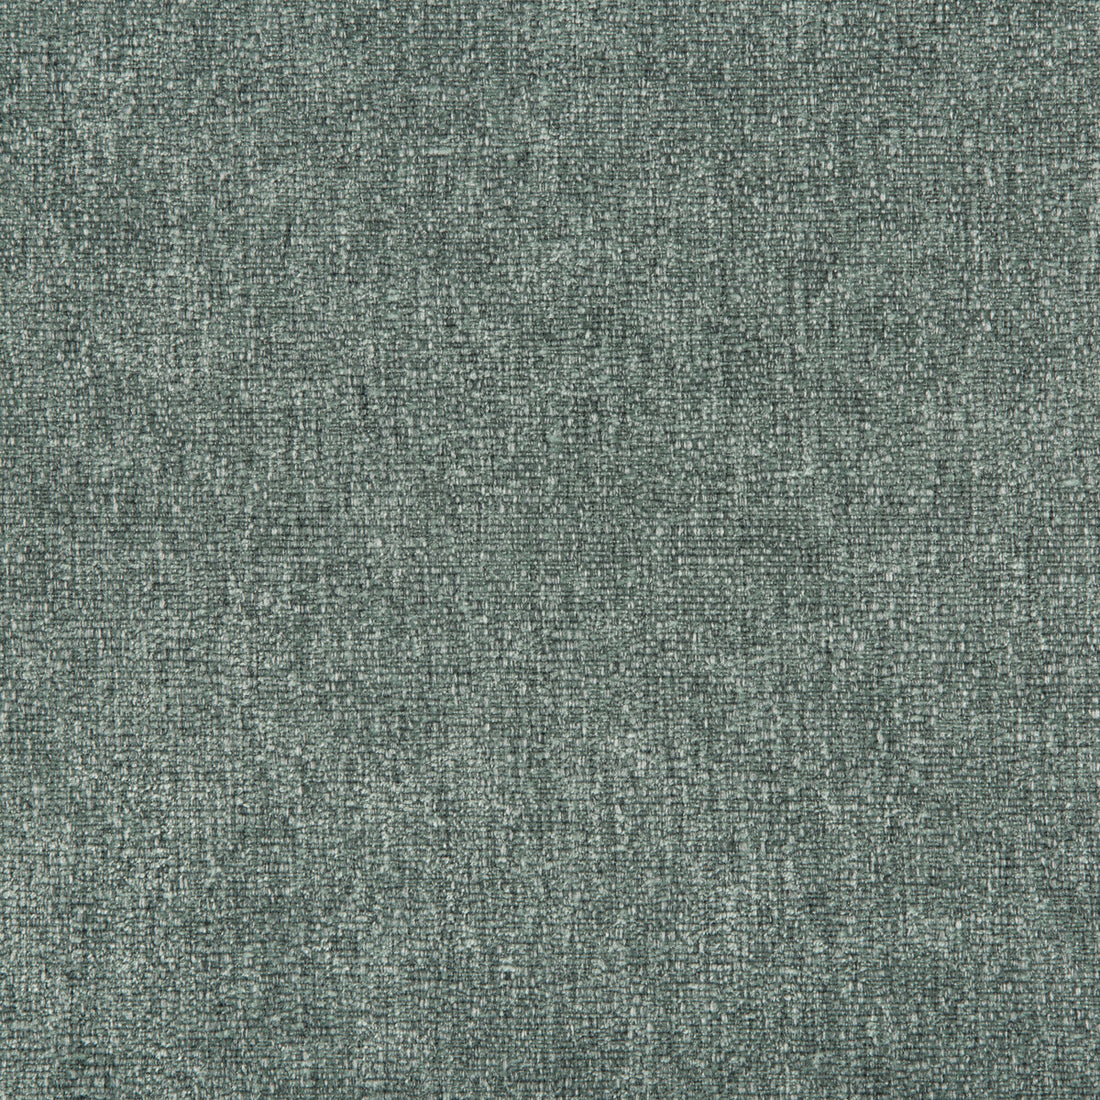 Kravet Smart fabric in 35391-135 color - pattern 35391.135.0 - by Kravet Smart in the Performance Crypton Home collection